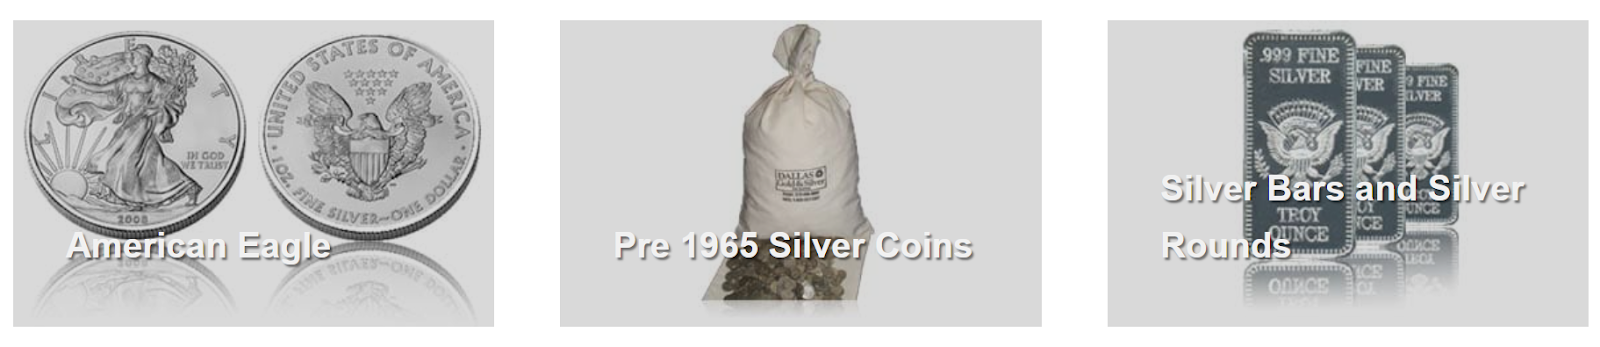 dallas gold and silver products